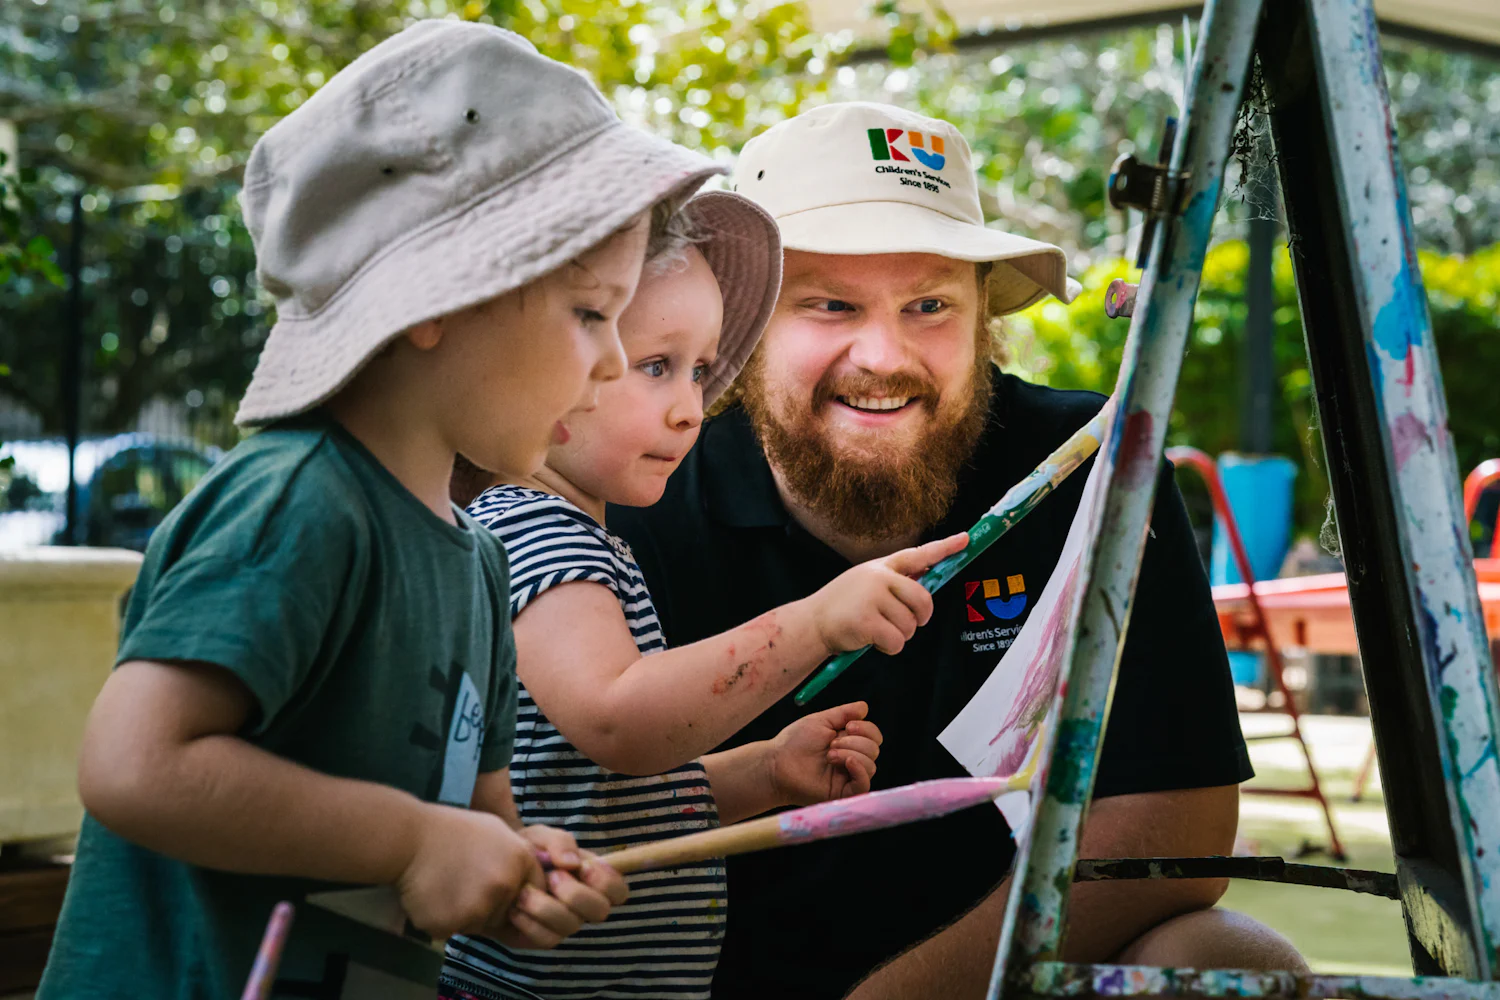 Child care and Preschool  in Sydney